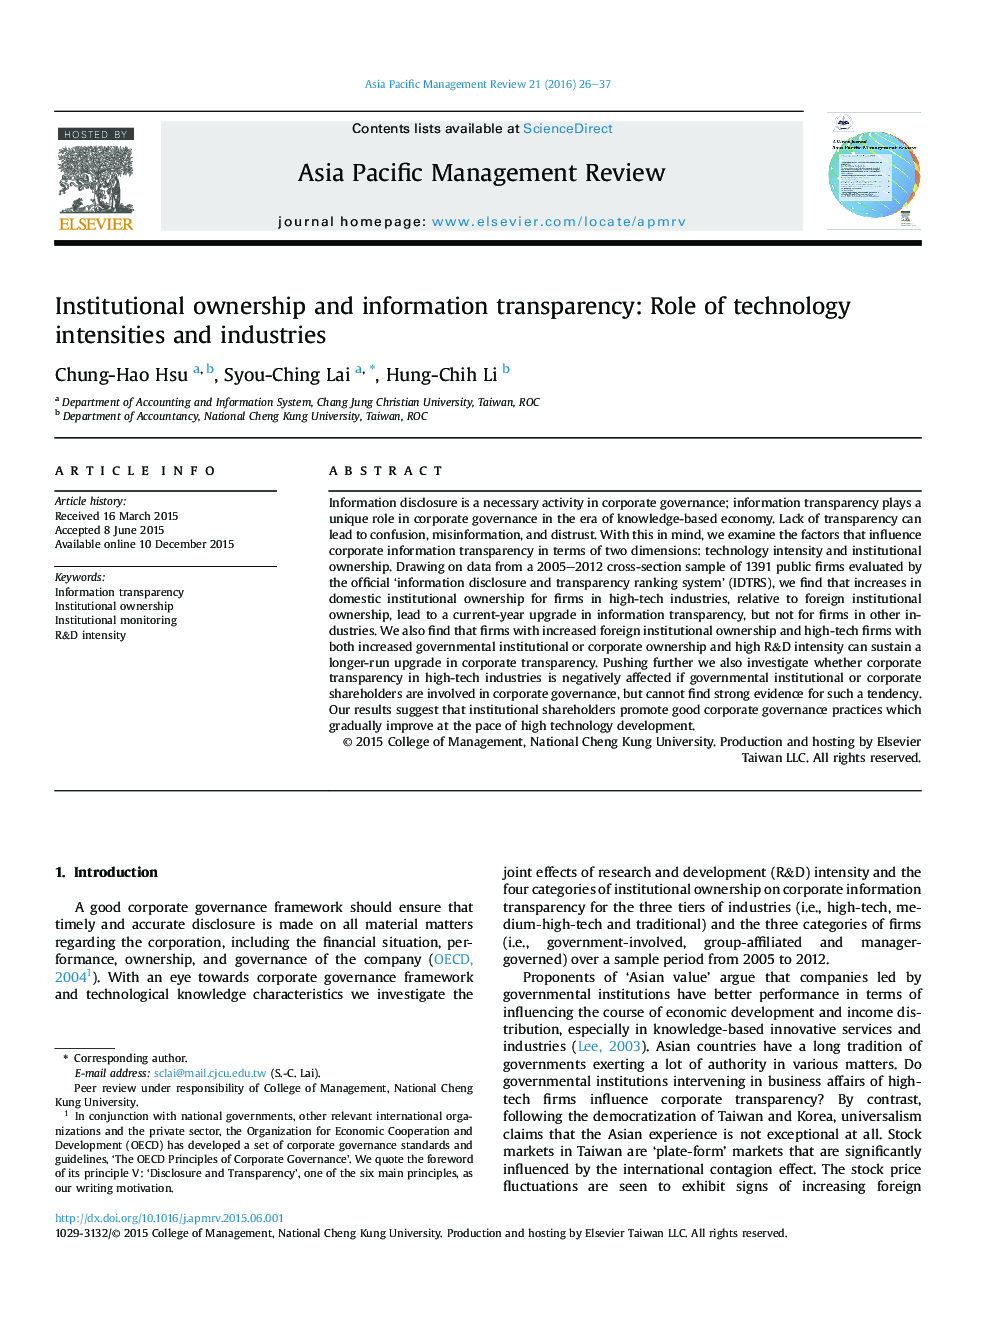 Institutional ownership and information transparency: Role of technology intensities and industries 